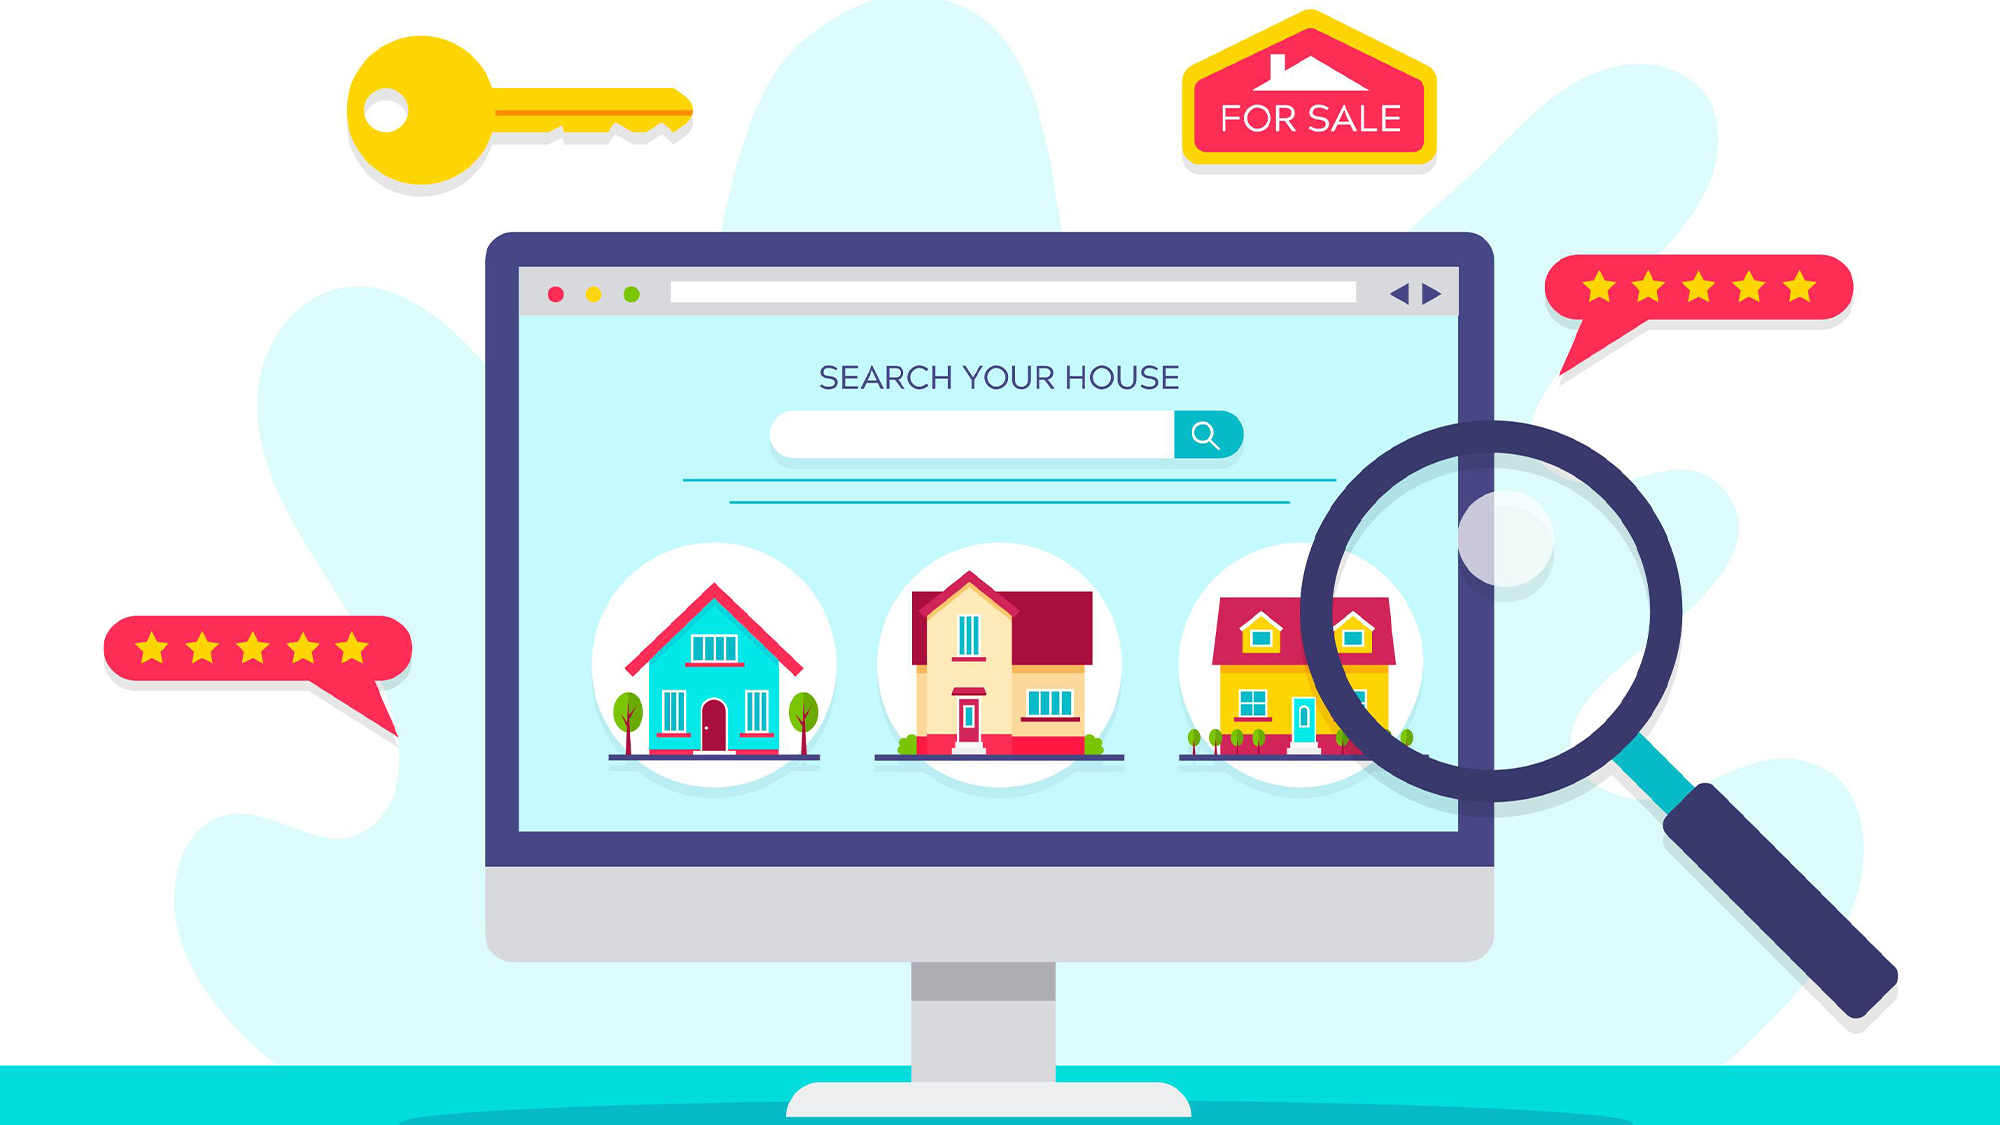 How to Properly Use Real Estate Websites for House Hunting